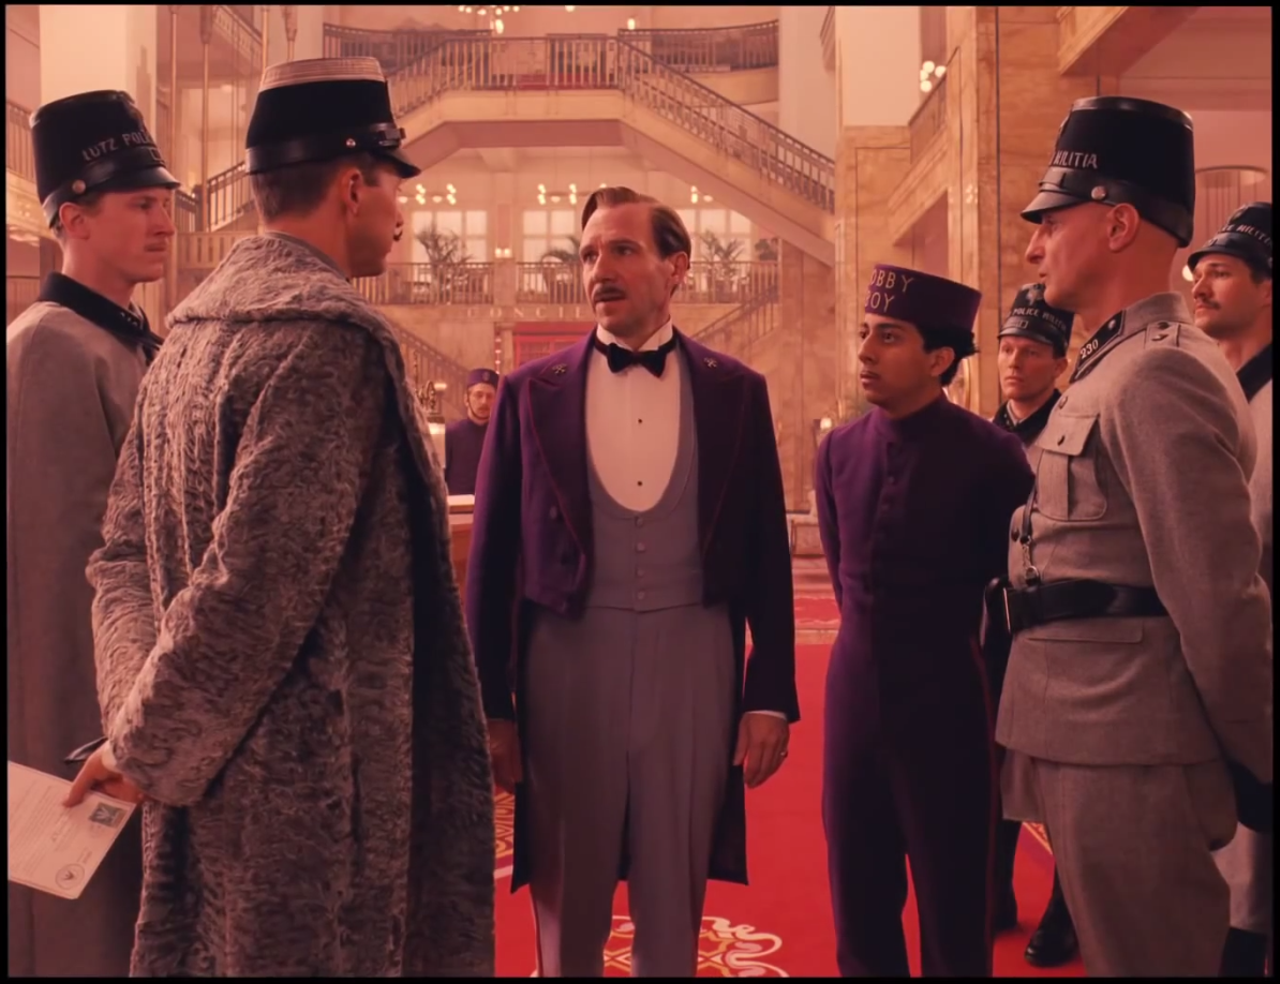 5. The Grand Budapest Hotel (Directed by Wes Anderson)
There aren't many filmmakers today who can turn the premiere of a trailer into an event unto itself, but then, there aren't many filmmakers working today as widely and intensely beloved as Wes Anderson. And anyway, a certain fervor seems warranted: The Grand Budapest Hotel is set in 1920s Europe, was shot on three different formats and in three different aspect ratios, and stars Ralph Fiennes, Willem Dafoe, Adrien Brody, Harvey Keitel, Bill Murray, Tom Wilkinson, Jude Law, Owen Wilson, and Tilda Swinton -- and that's just a partial list. The world isn't ready for this much twee. Watch the trailer. (Tentative release date: March 7)